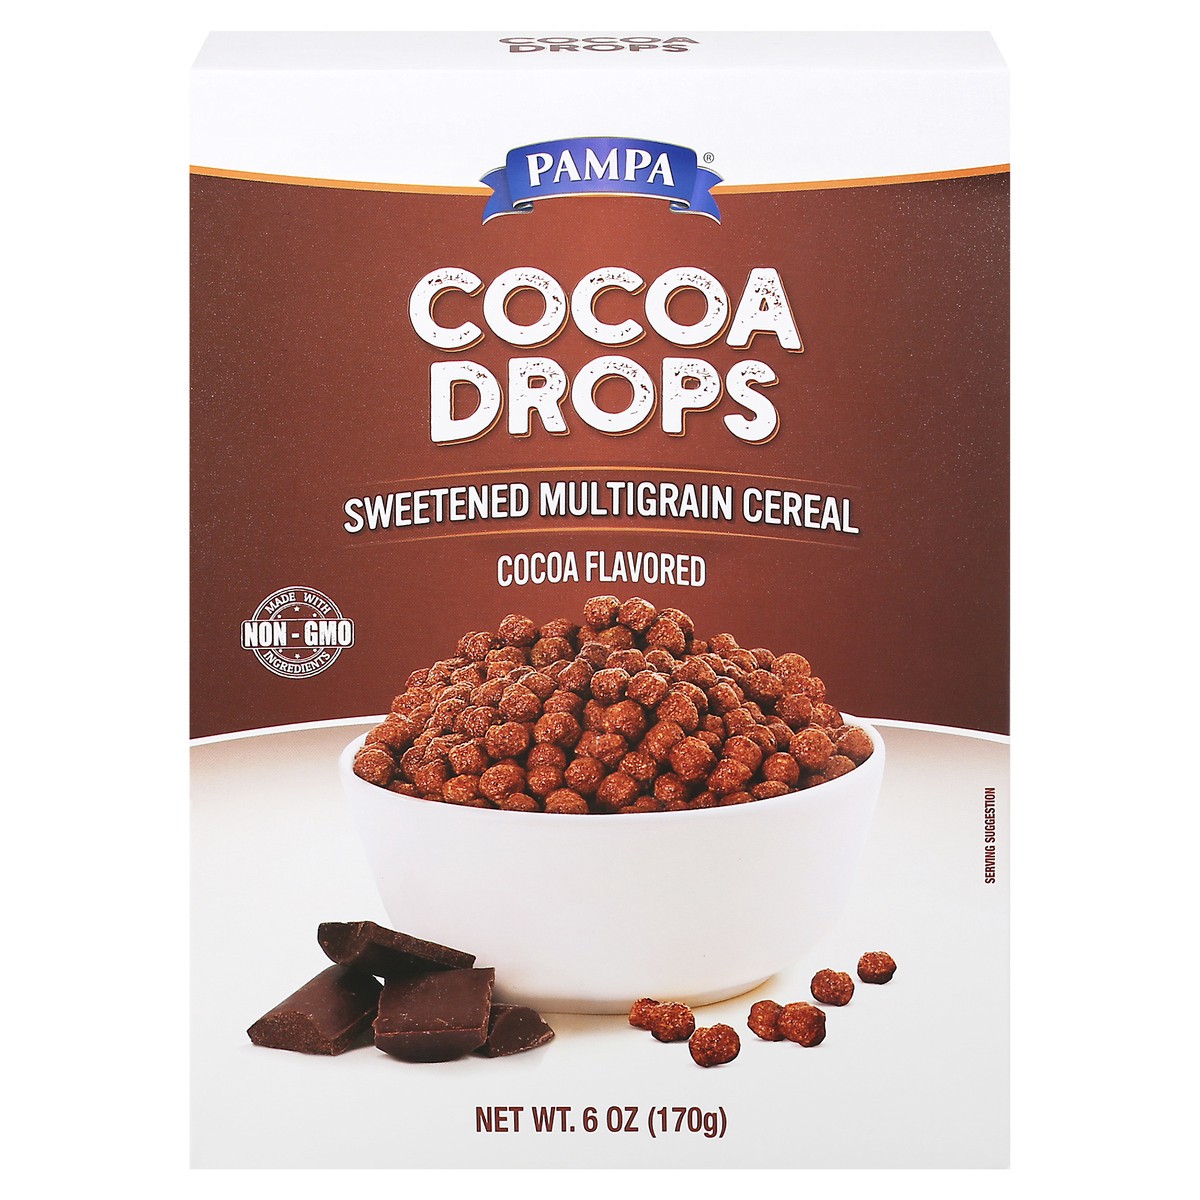 slide 1 of 14, Pampa Cocoa Drops Cereal 6 oz, 6 oz